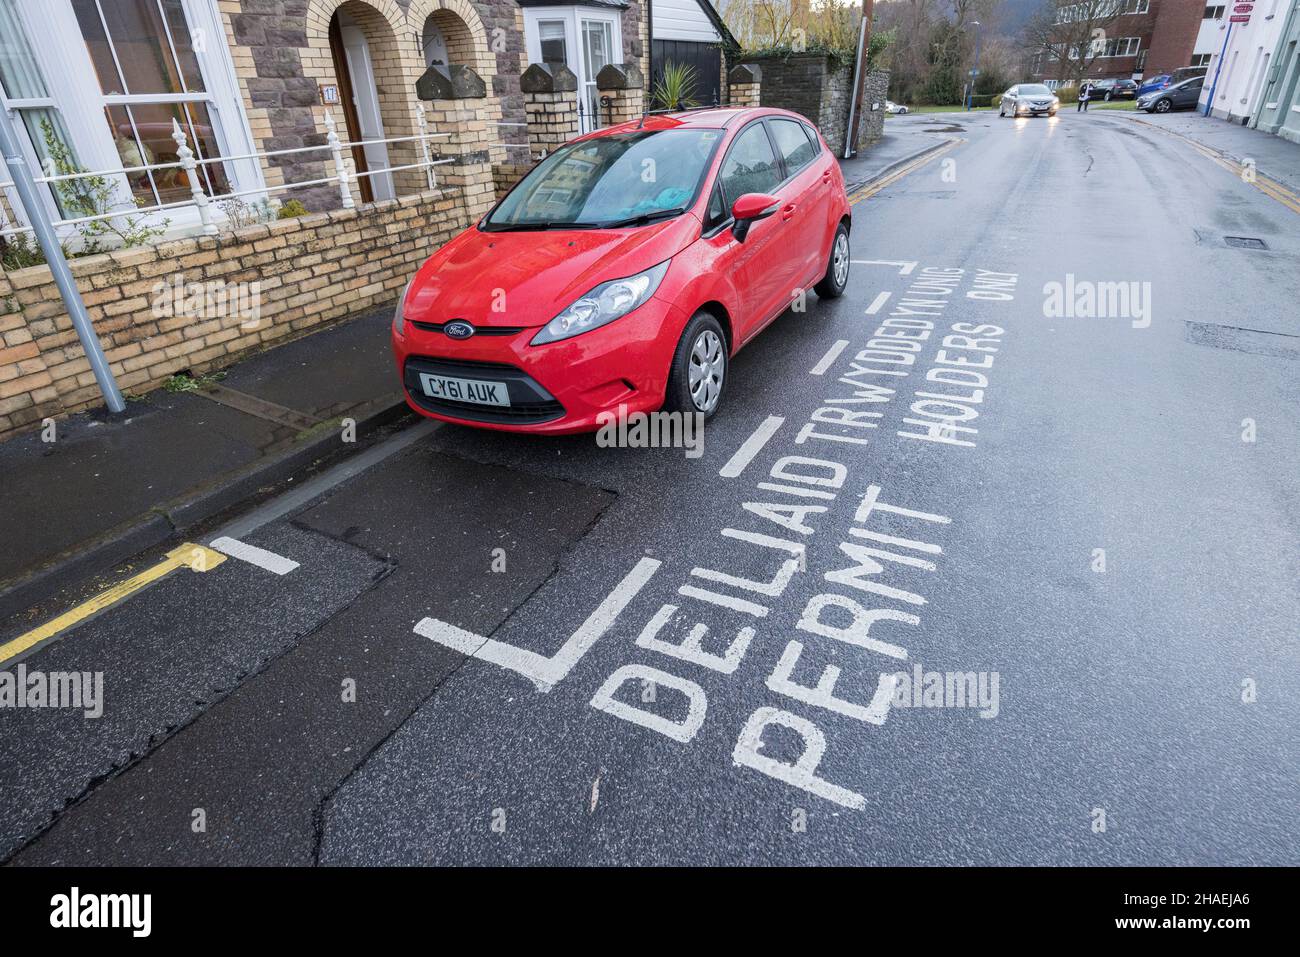 Permit holders only parking area in street with bilingual English and Welsh writing, Abergavenny, Wales, UK Stock Photo